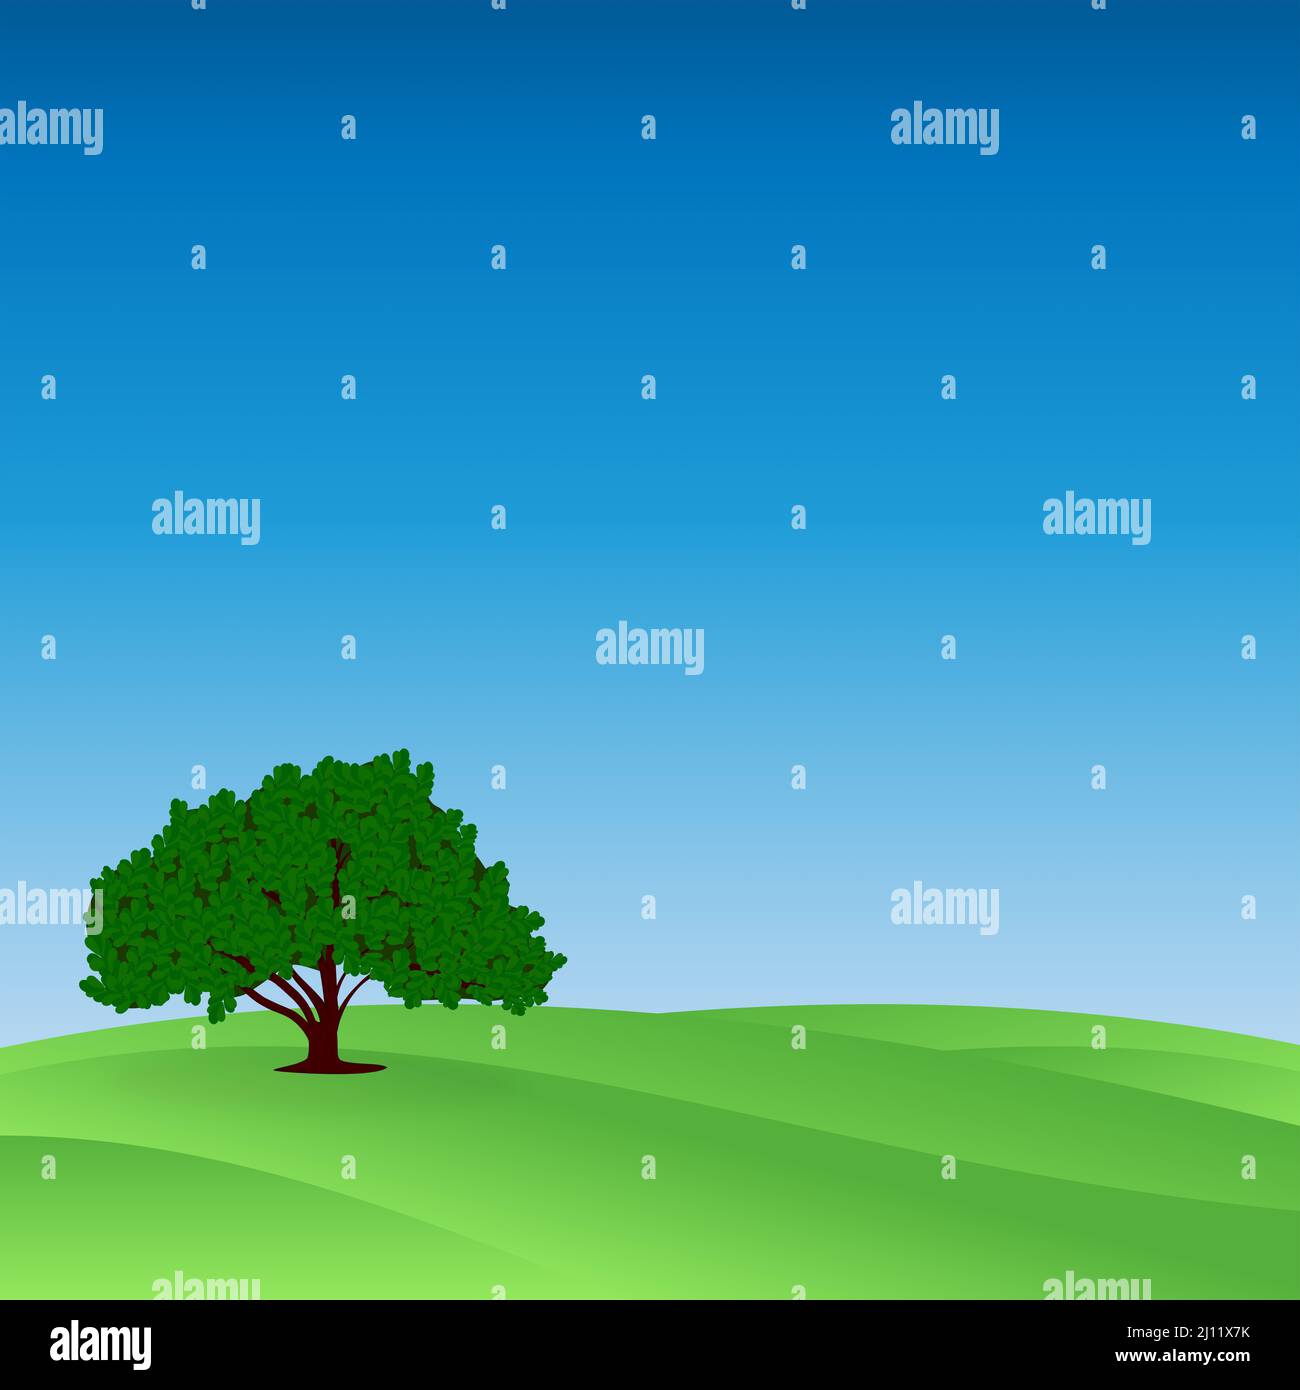 Illustration of an oak tree in a field of rolling green hills with blue sky Stock Photo